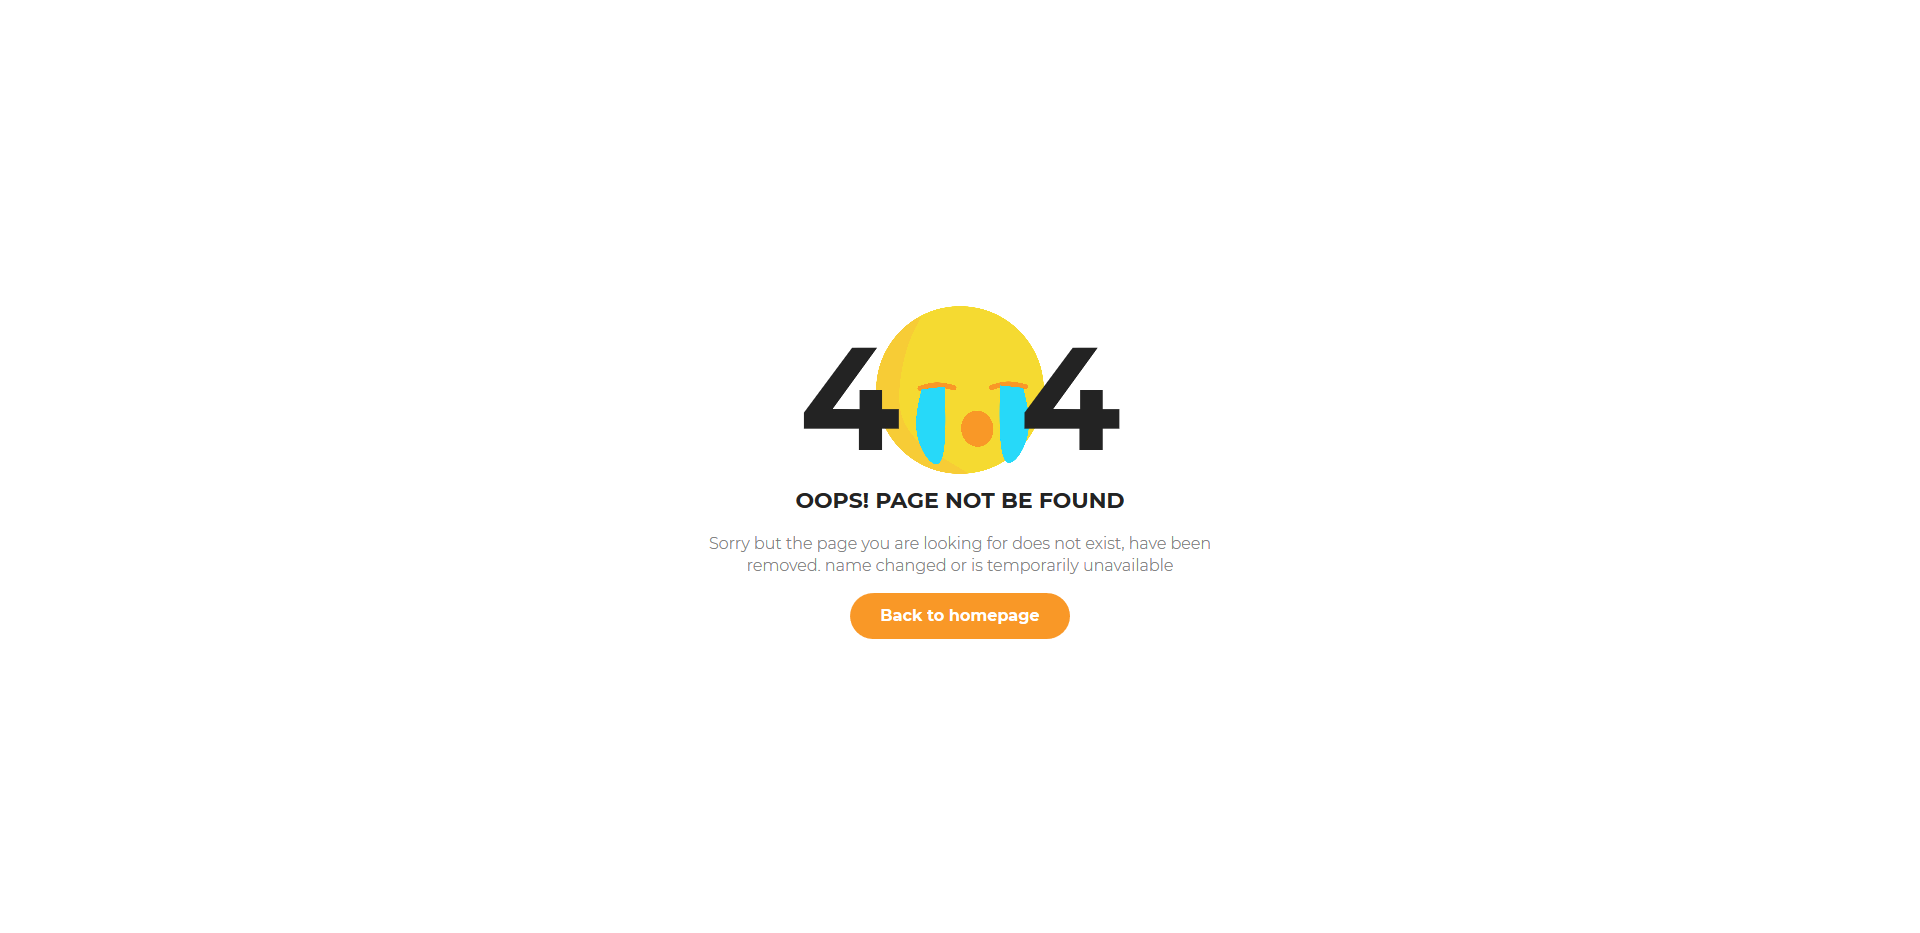 http-error-pages-templates